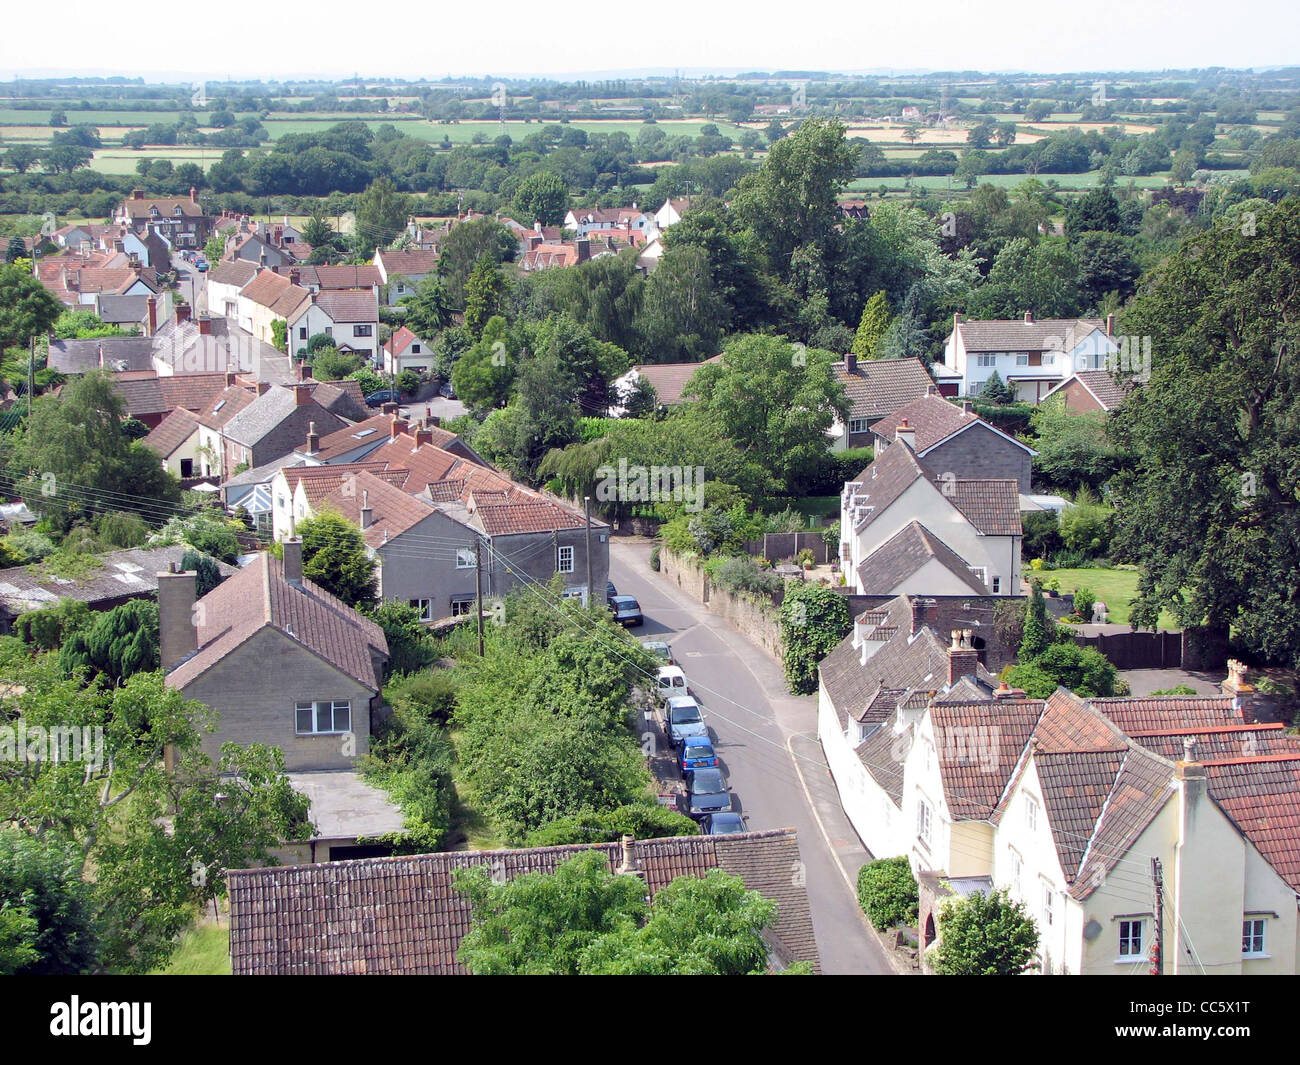 Iron Acton, South Gloucestershire, looking west down the main street, from the tower of the village church (St. James the Less). Stock Photo